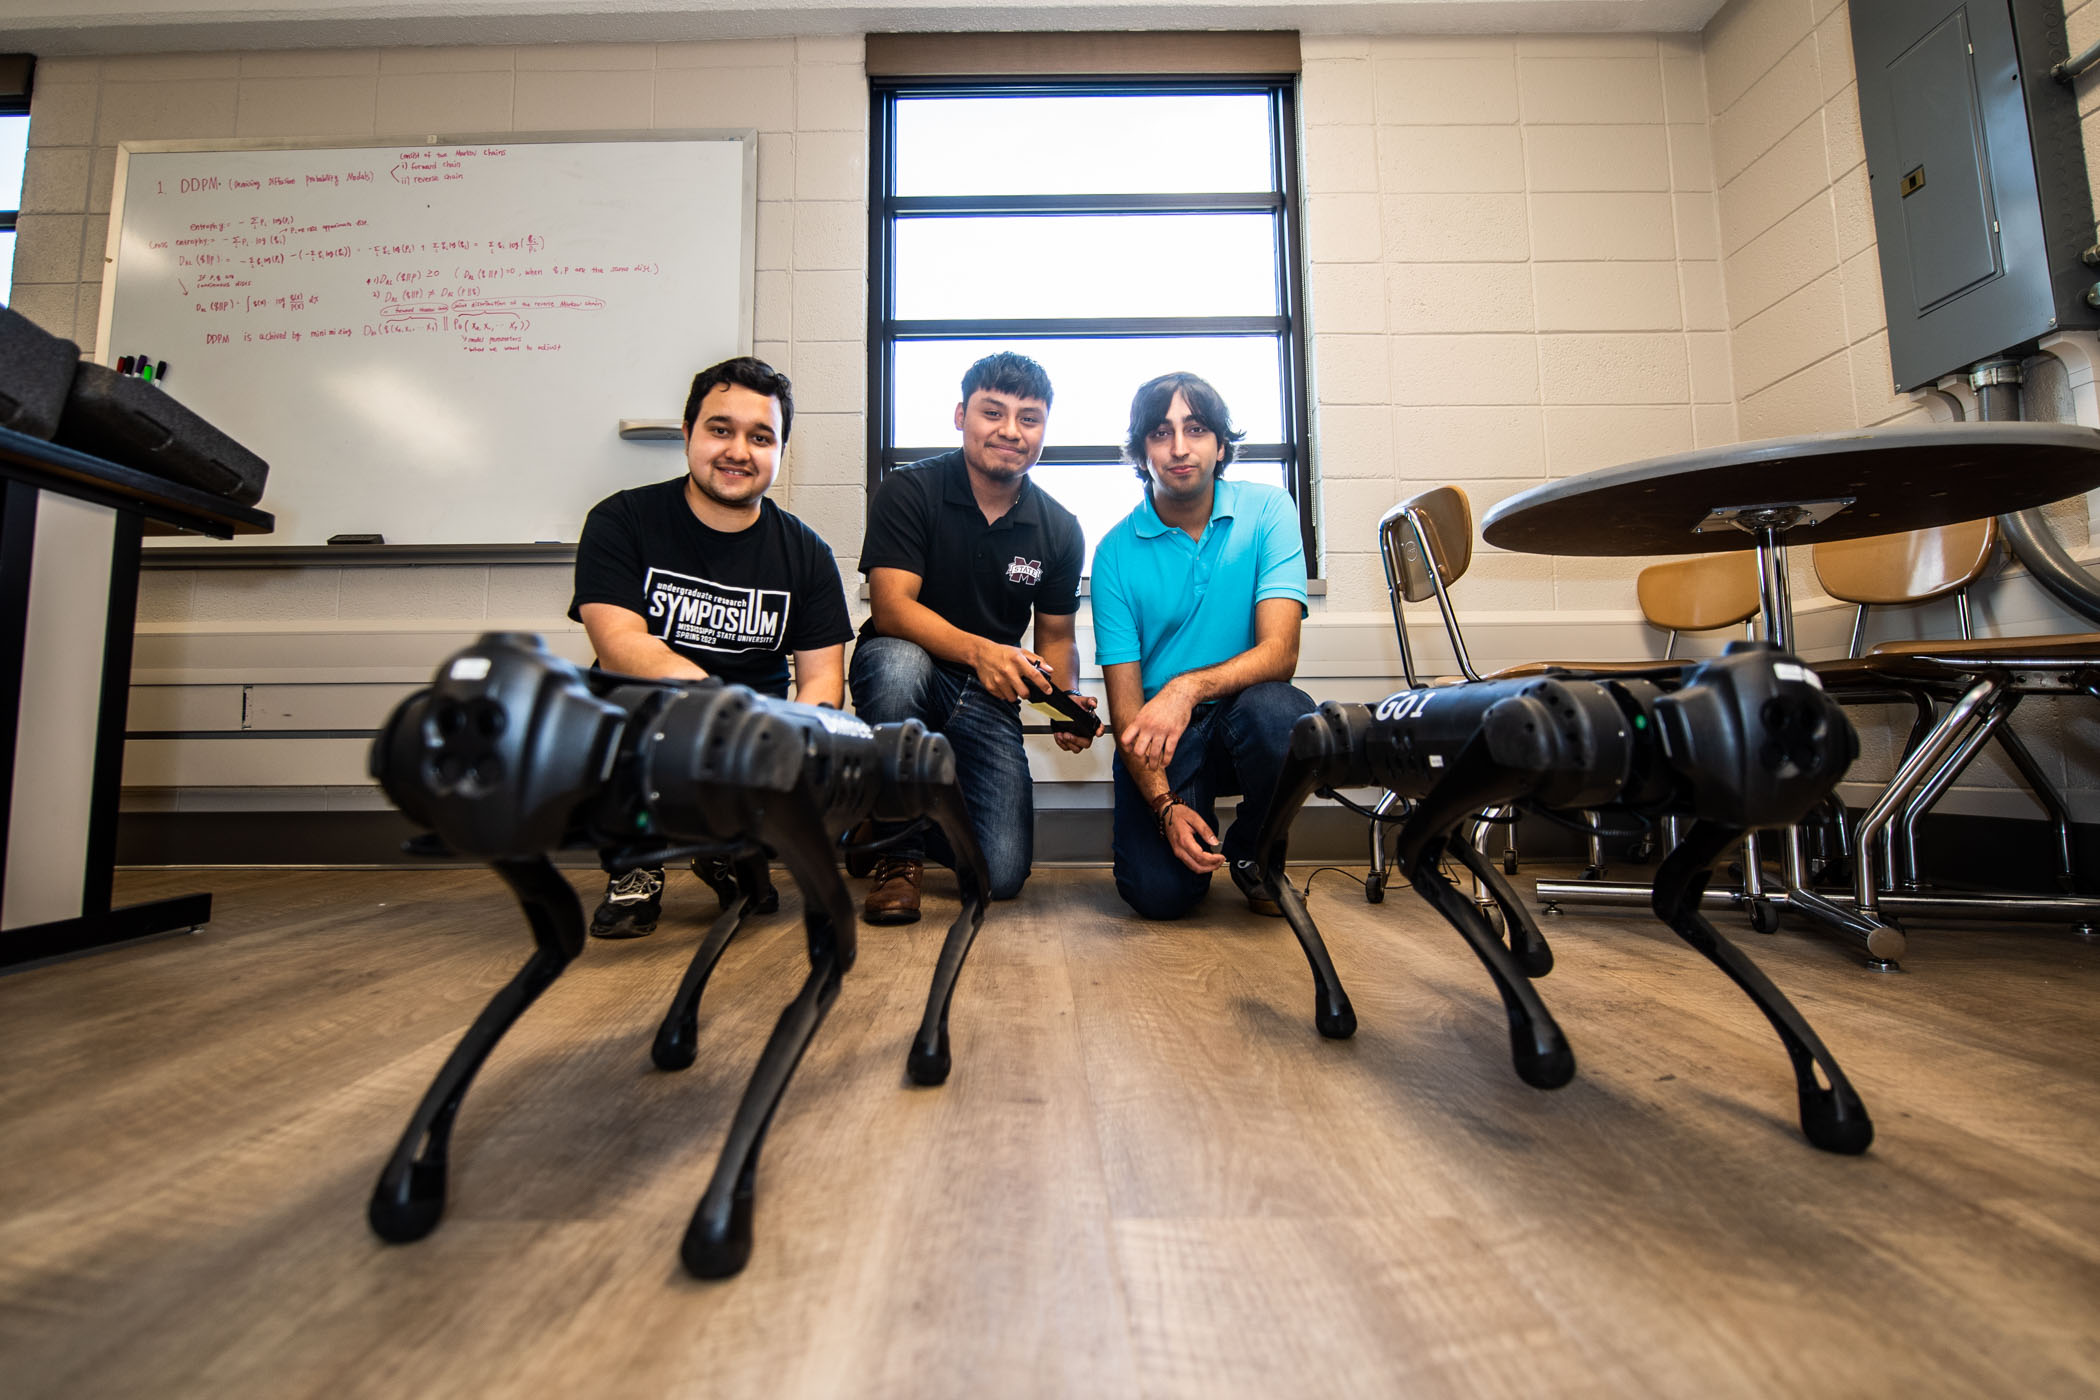 MSU Computer Science and Engineering students (L to R) Arjun Koinkar, Reyki Garcia, and Prabesh Khanal operate the department&#039;s Unitree Go1 quadruped robots